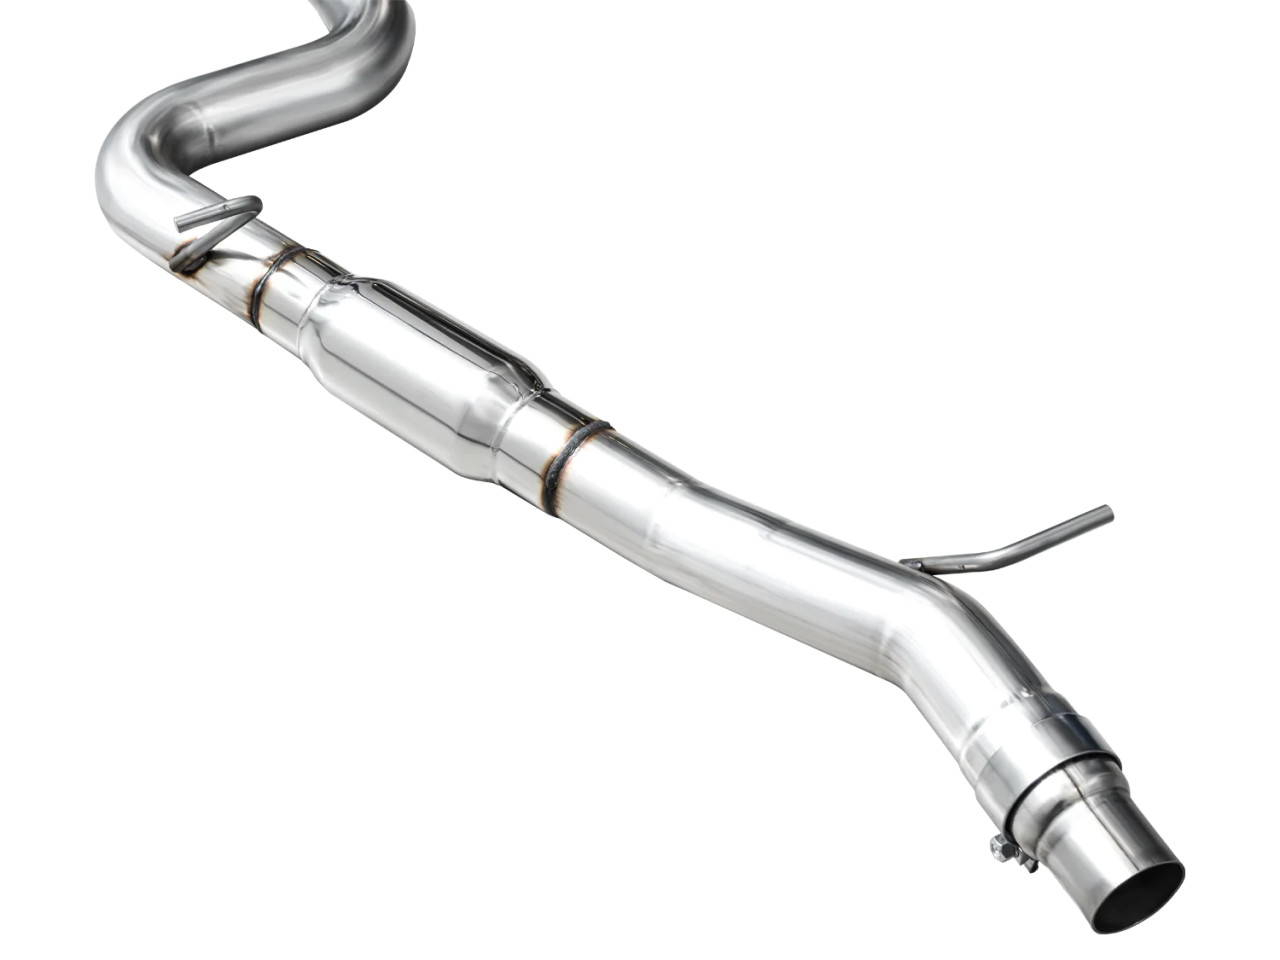 AWE Touring Edition Catback Exhaust for MK8 Golf R